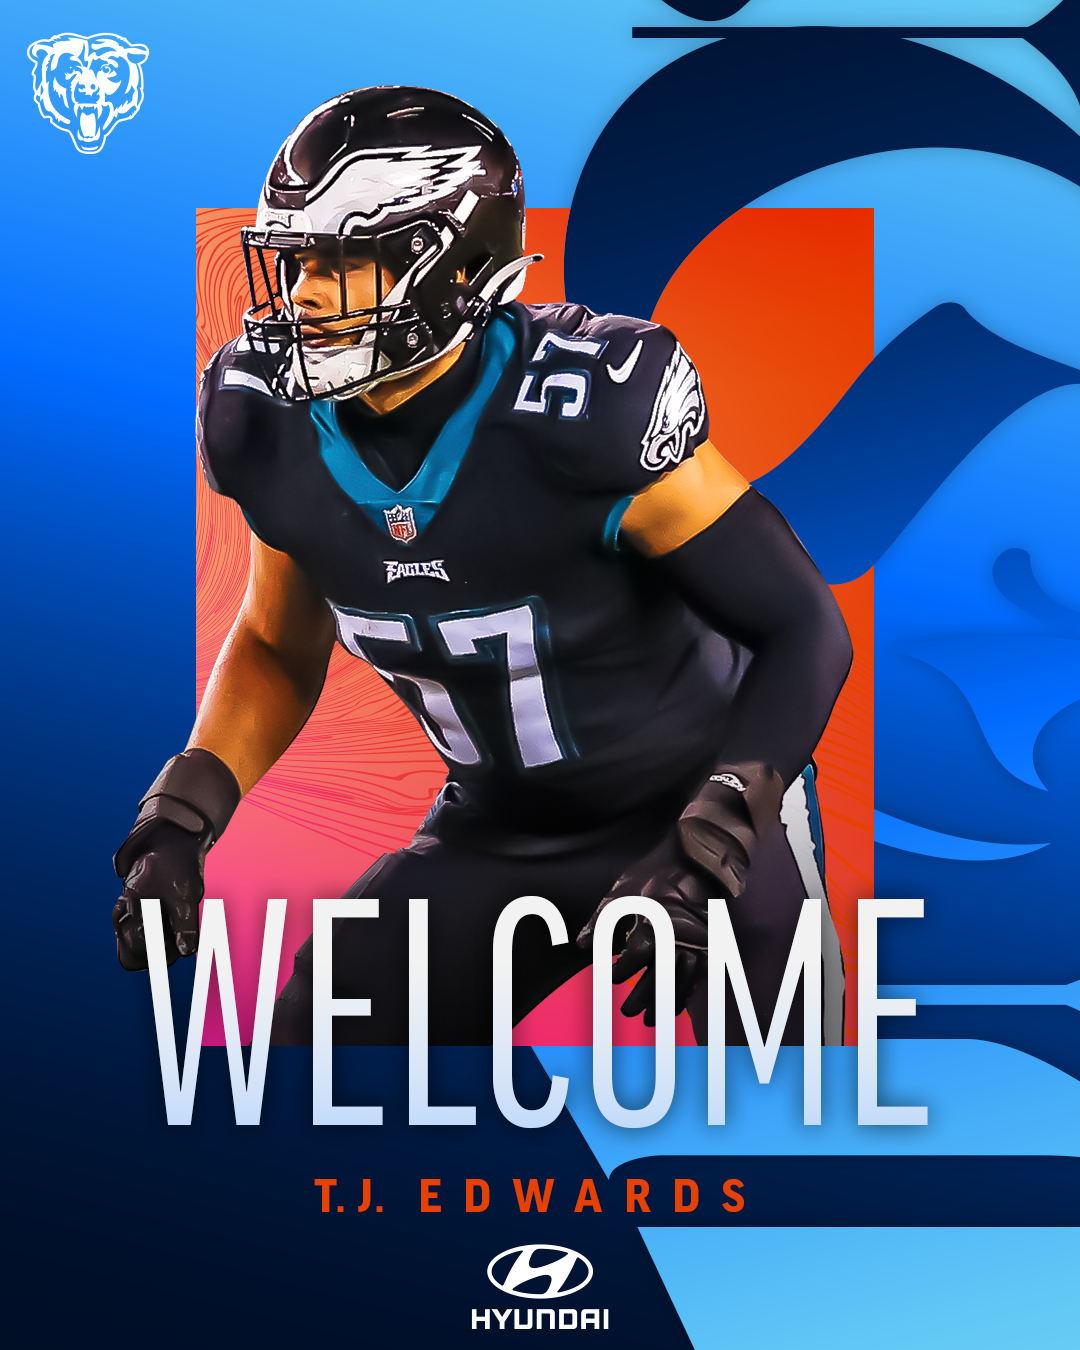 2023-FreeAgency-WELCOME-IG-4x5-1-EDWARDS.png